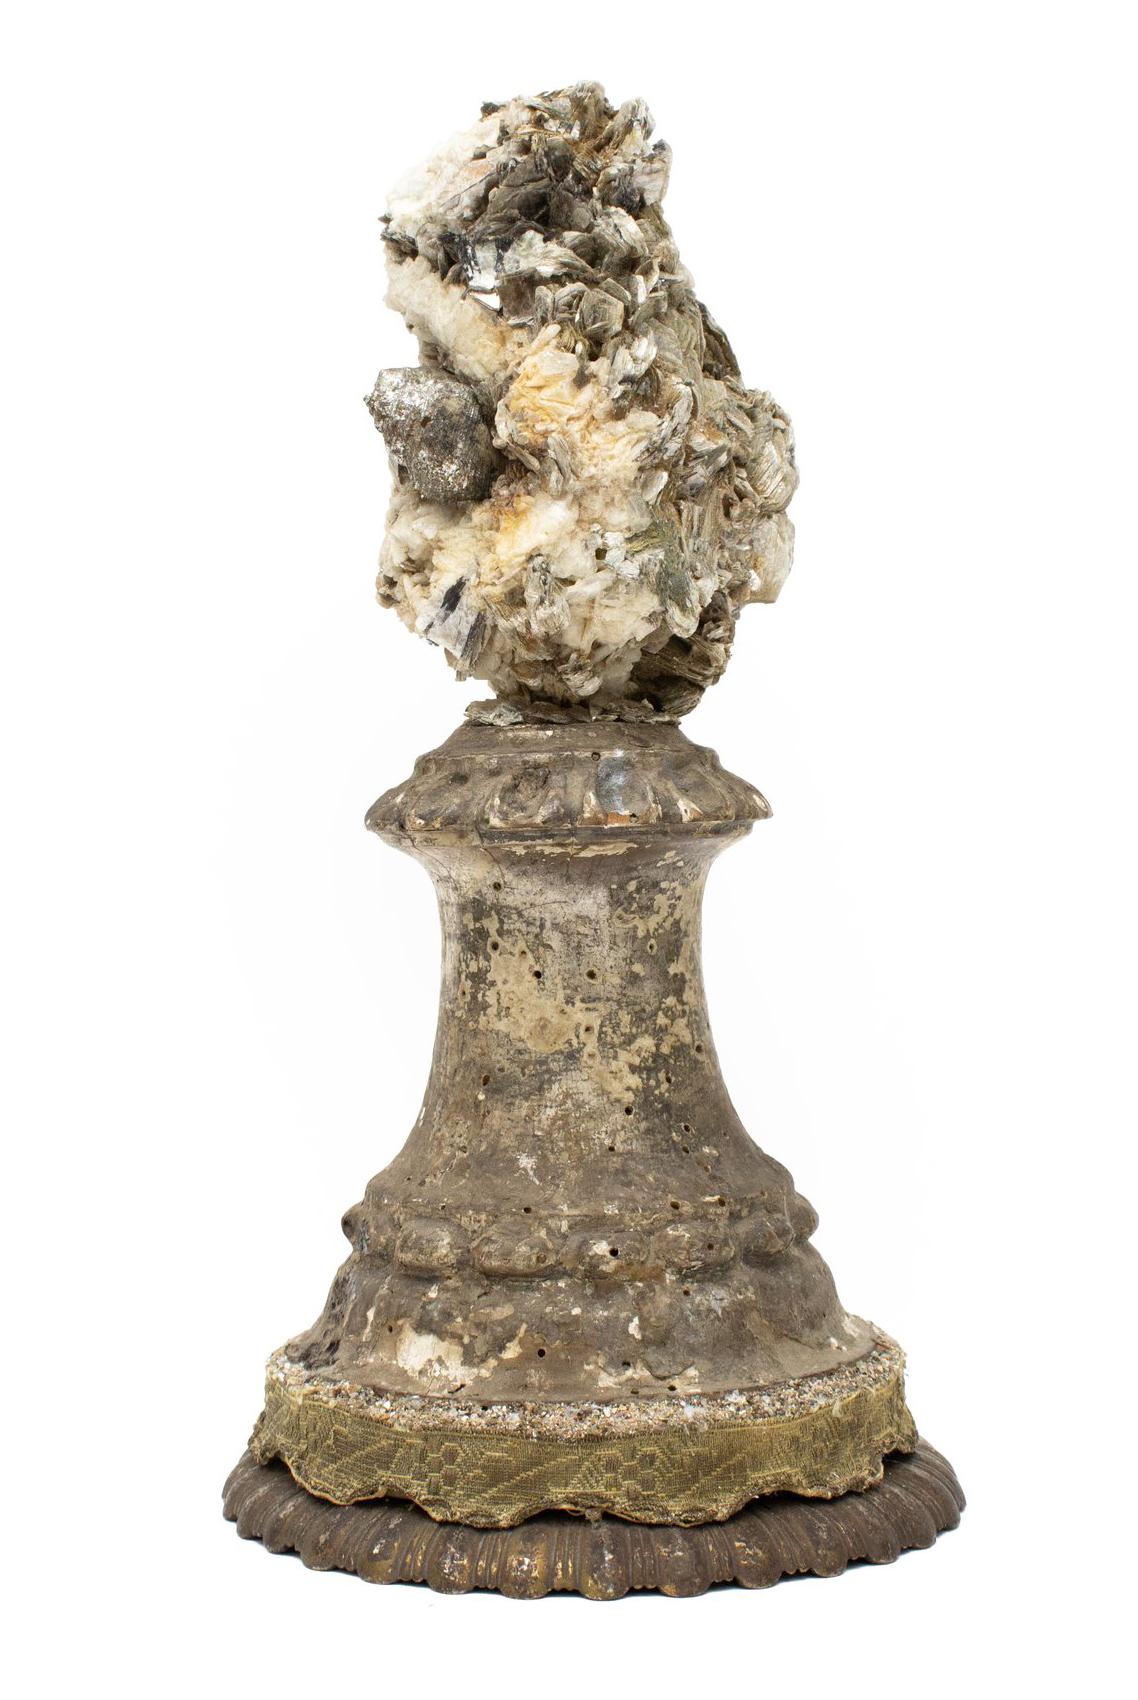 Sculptural 18th century Italian base decorated with mica in matrix, and silver leaf shells on an antique metal base decorated with church vestment braid. The 18th century fragment base and vestment braid originally came from a historical Italian